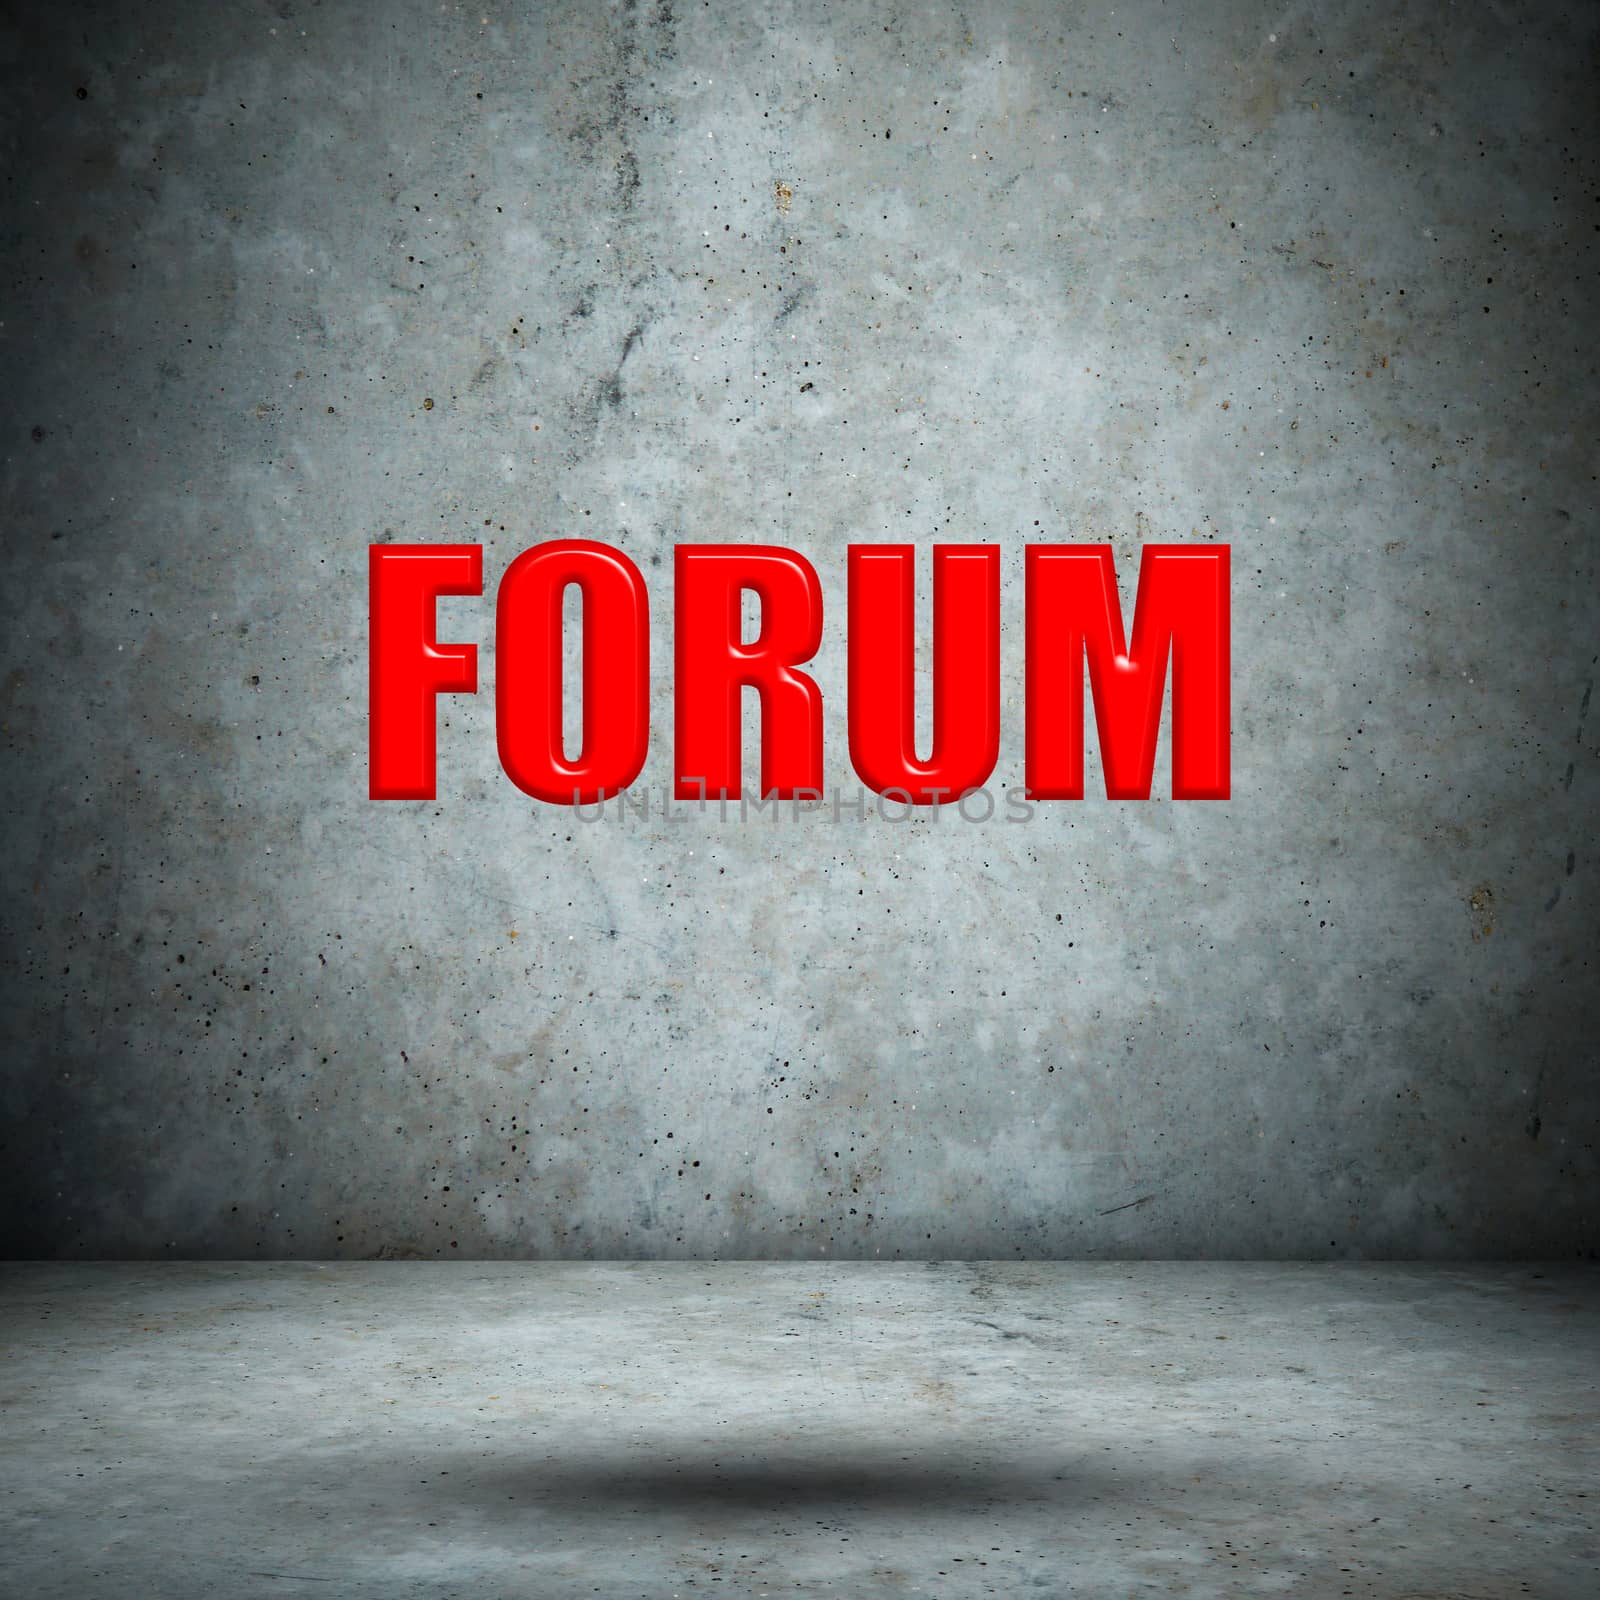 FORUM on concrete wall